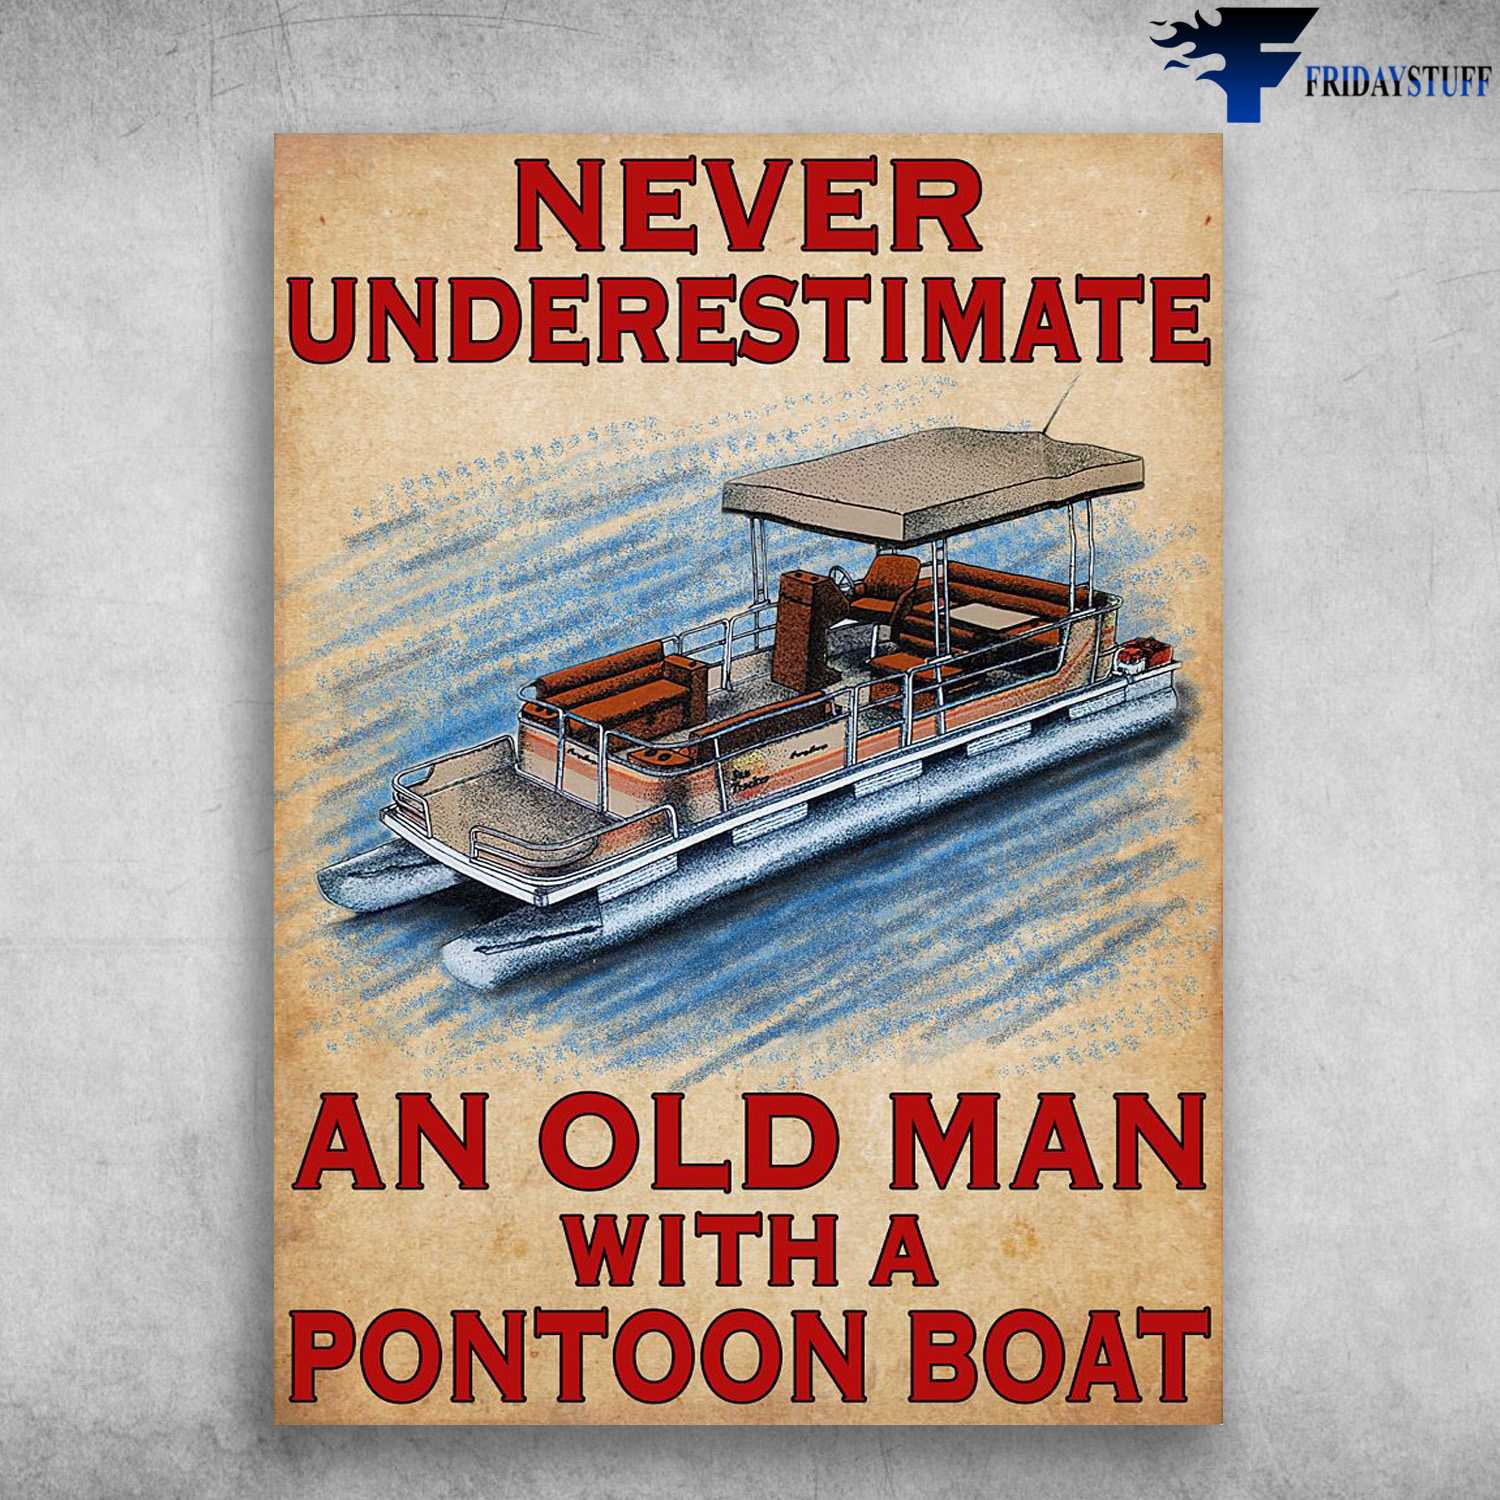 Pontoon Boat Poster, Never Underestimate, An Old Man, With A Pontoon Boat